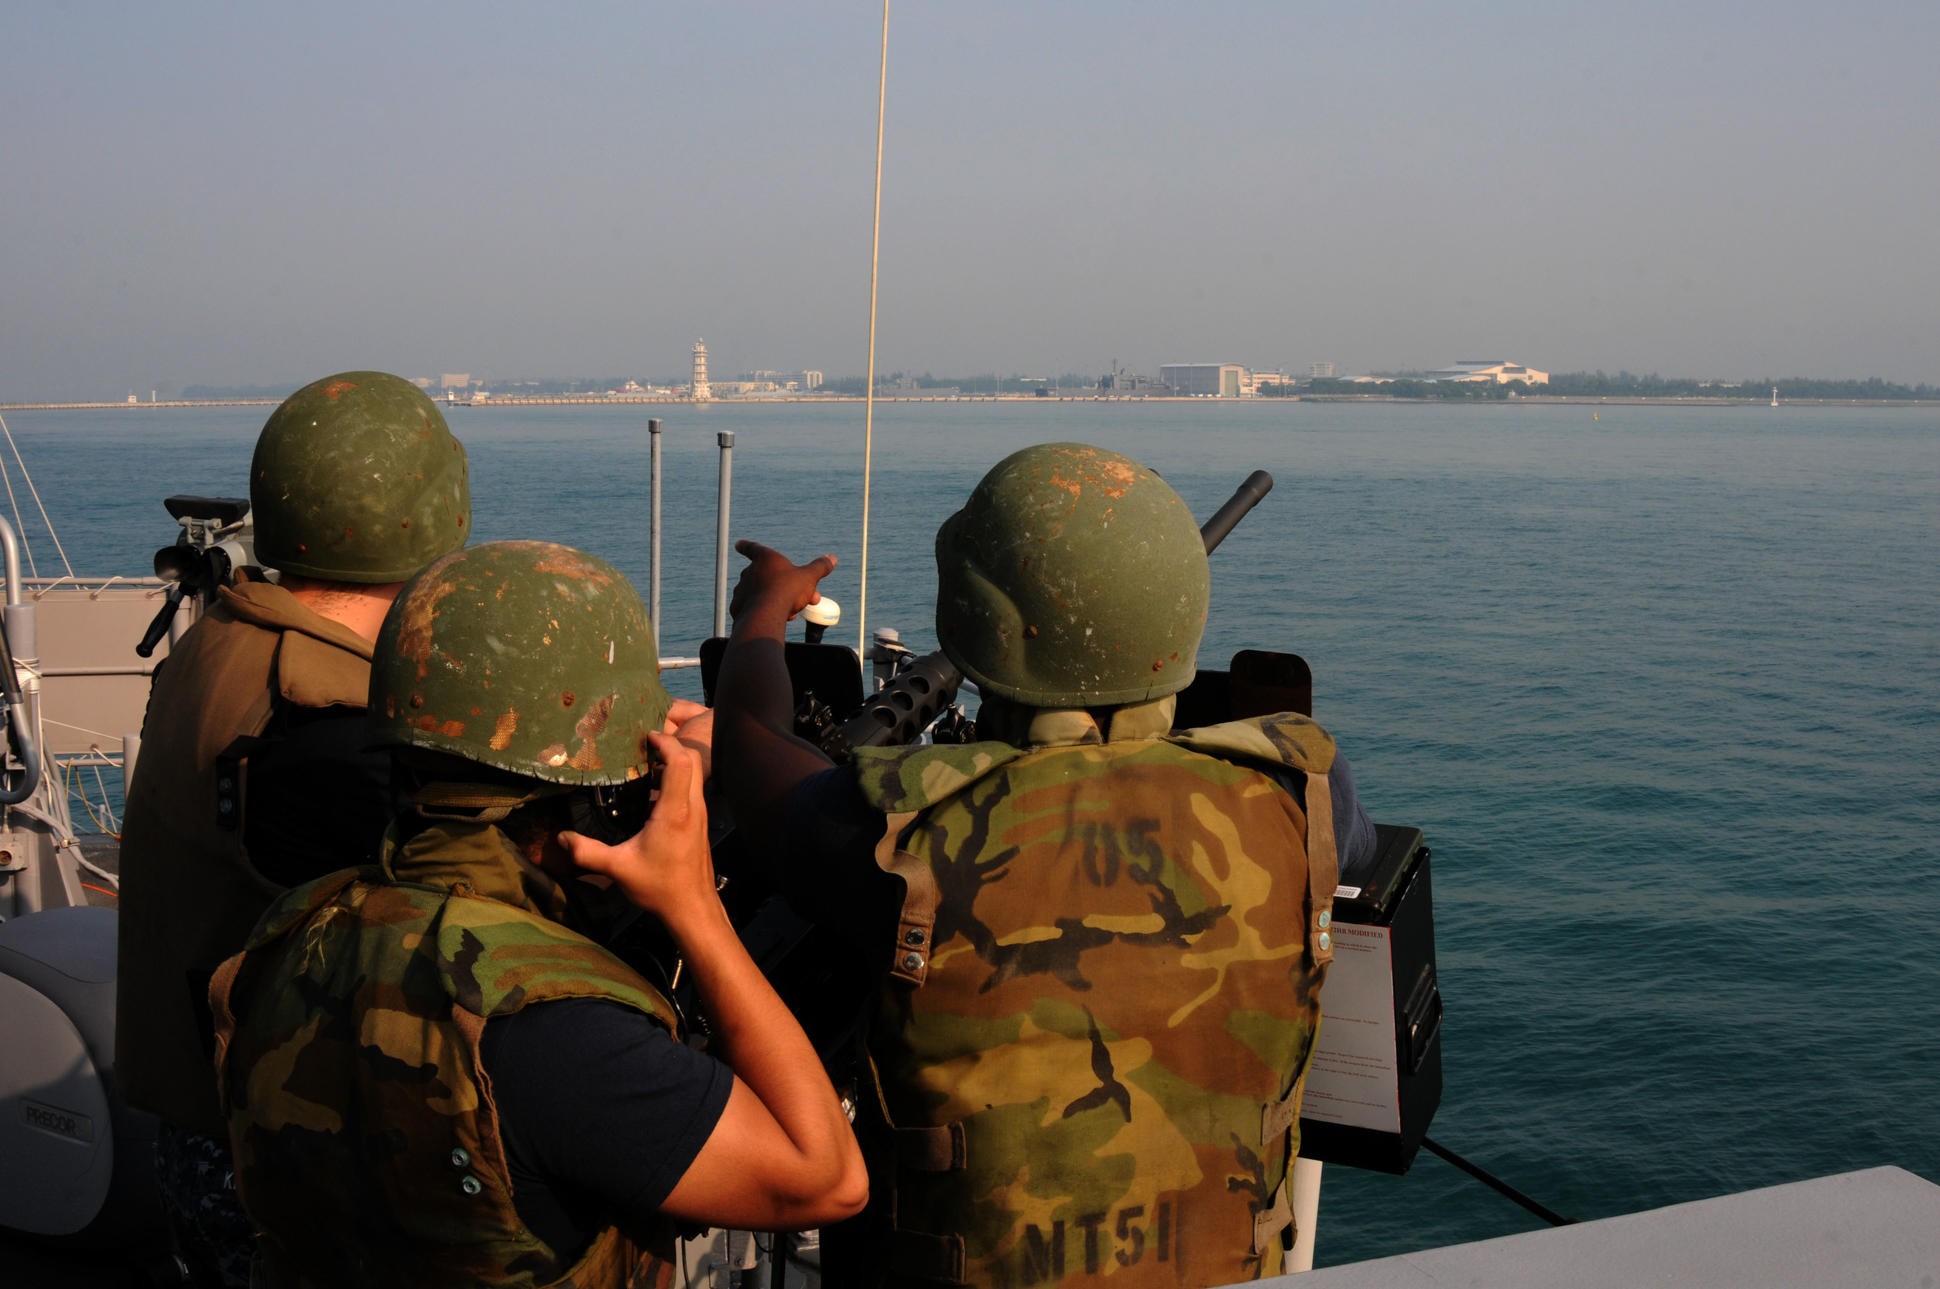 A multinational antipiracy and antiterrorism security force patrols the Strait of Malacca. China has also increased its naval presence in the strait to protect its interests. Photo: Alamy